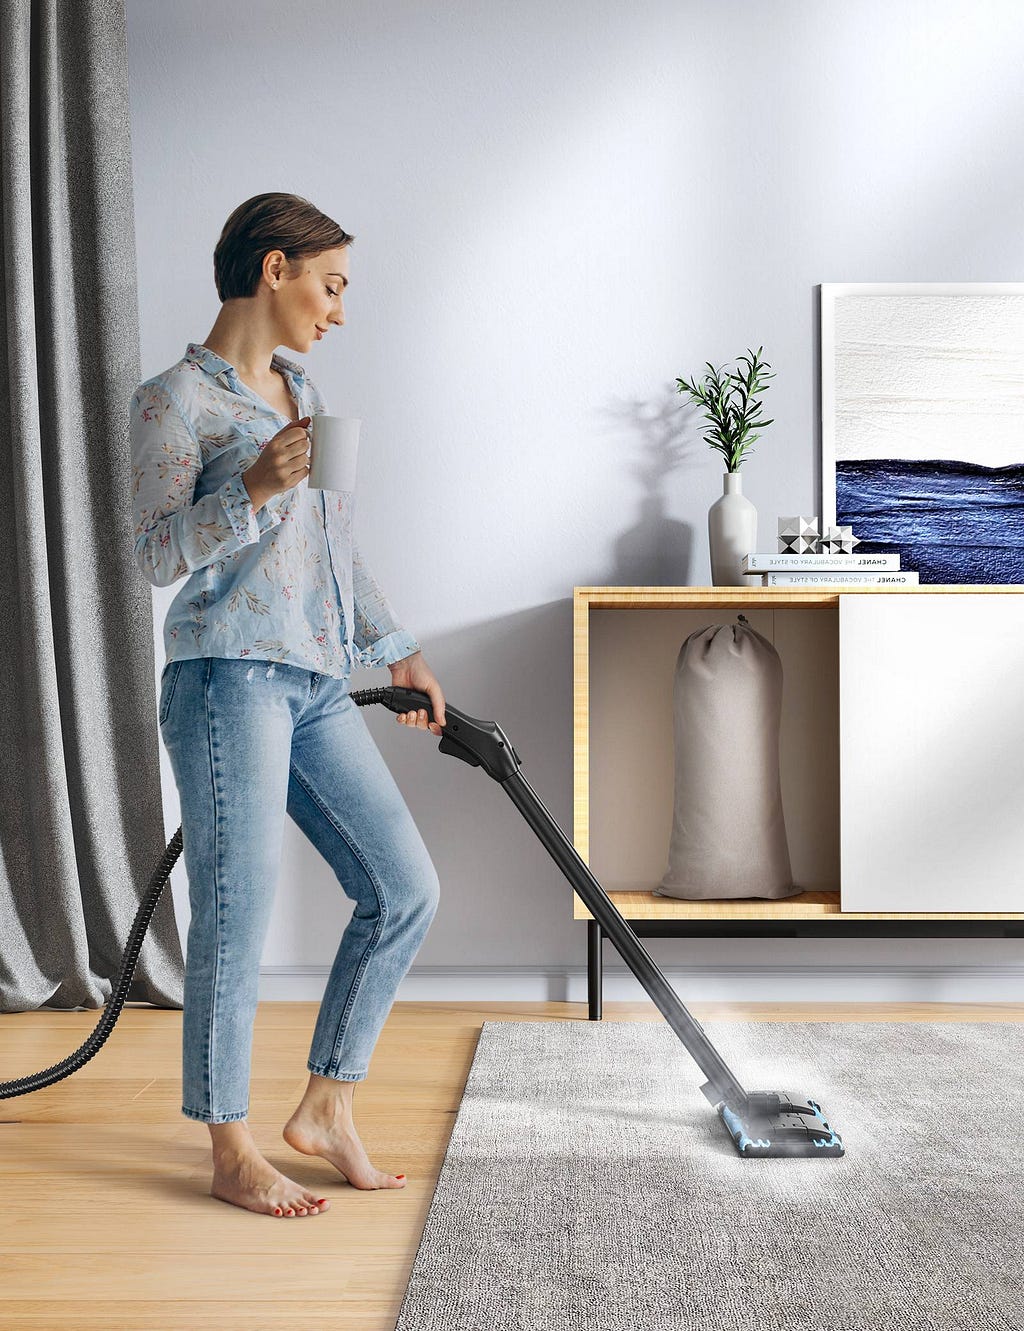 Female Doing Vaccum Cleaning in an Image